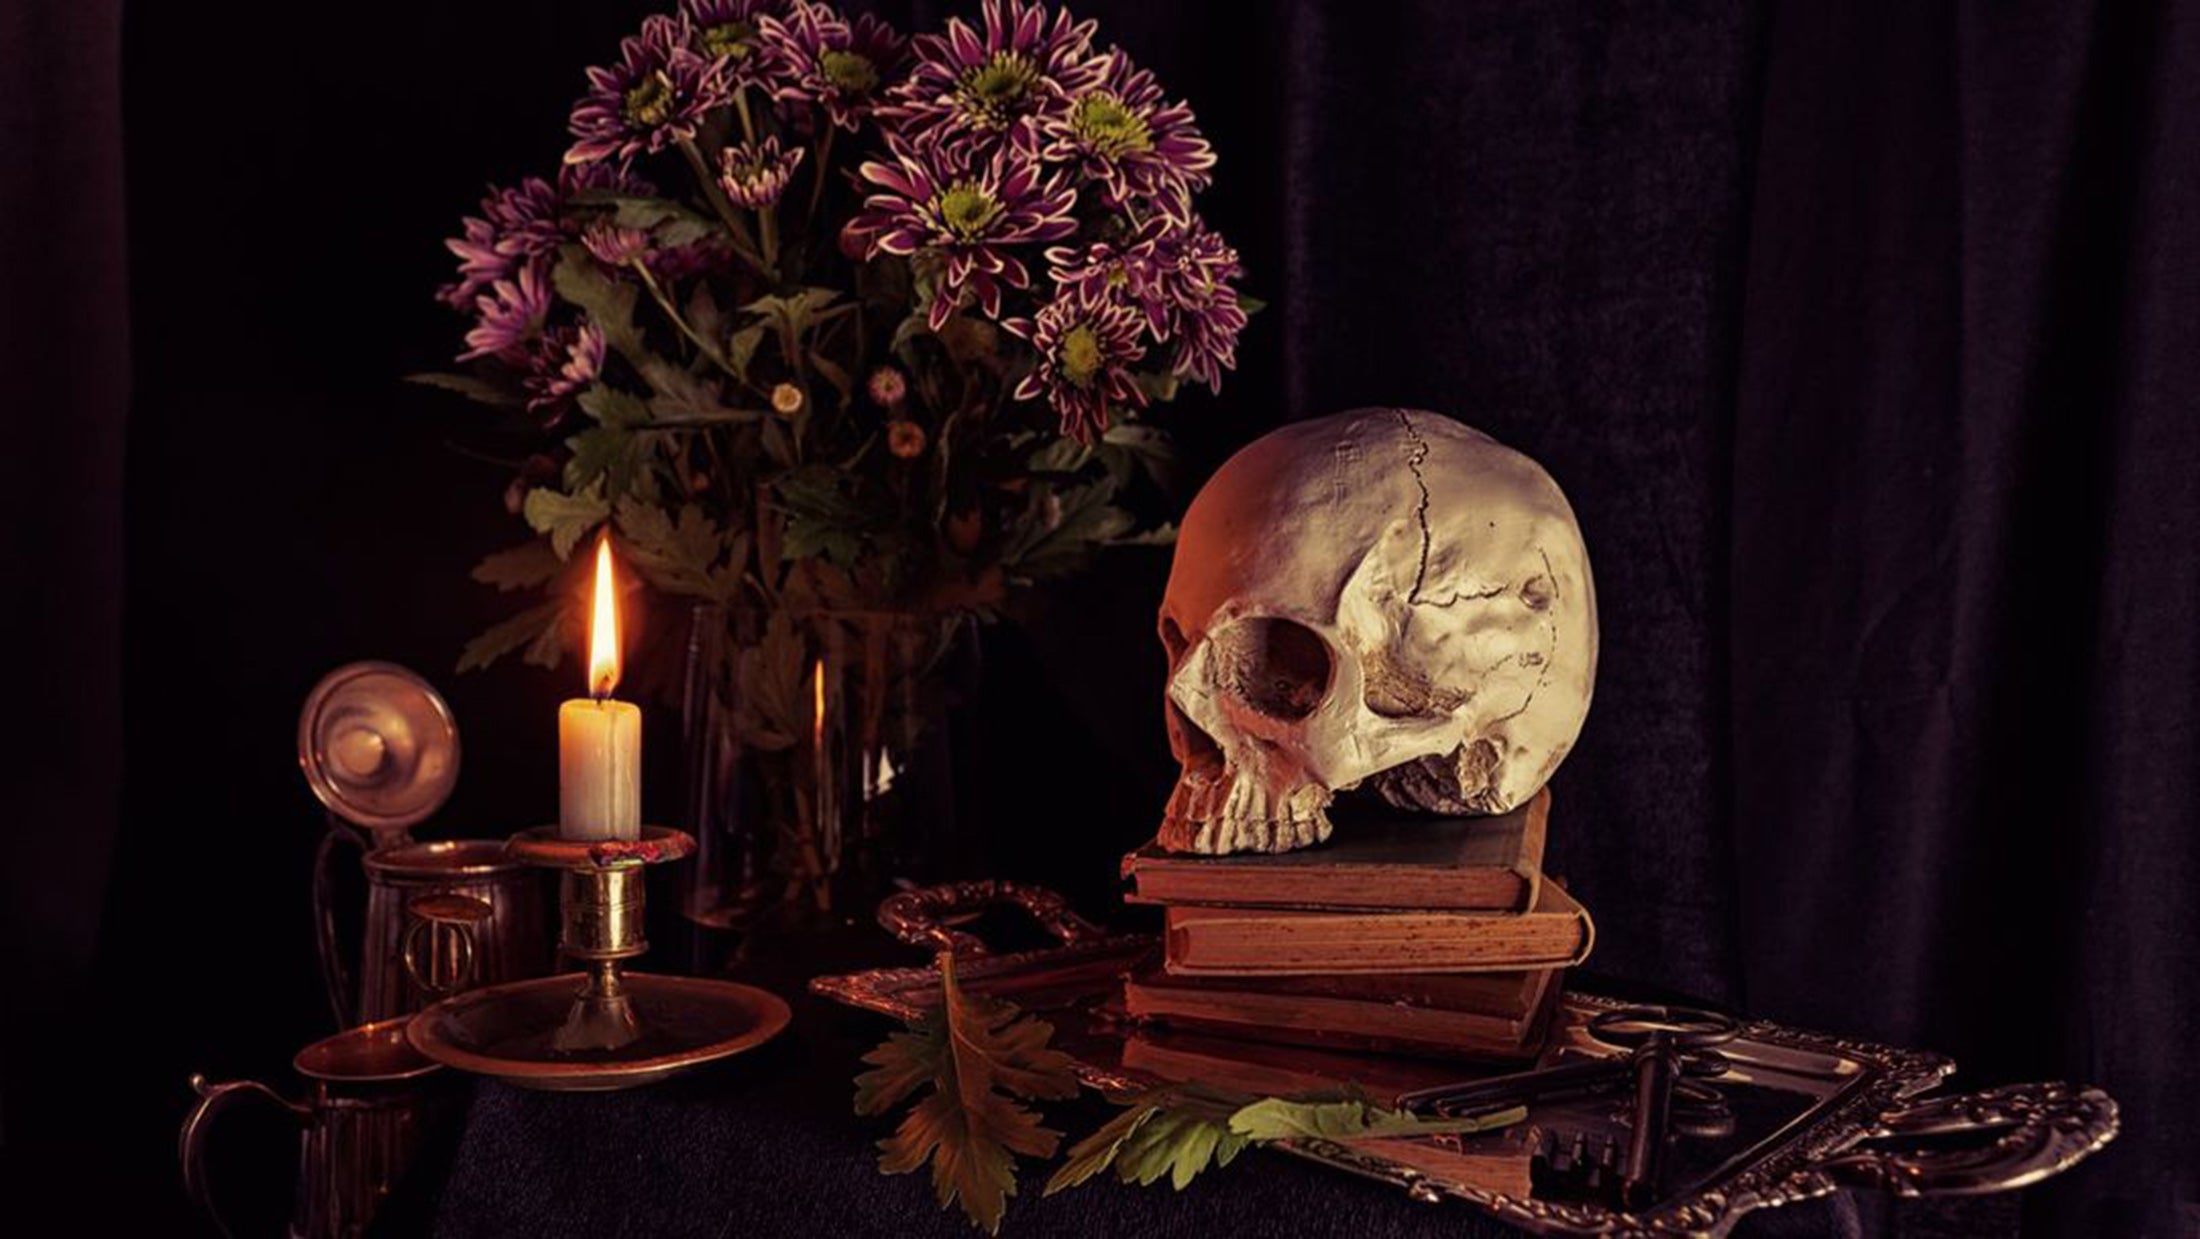 Moody skull and candle